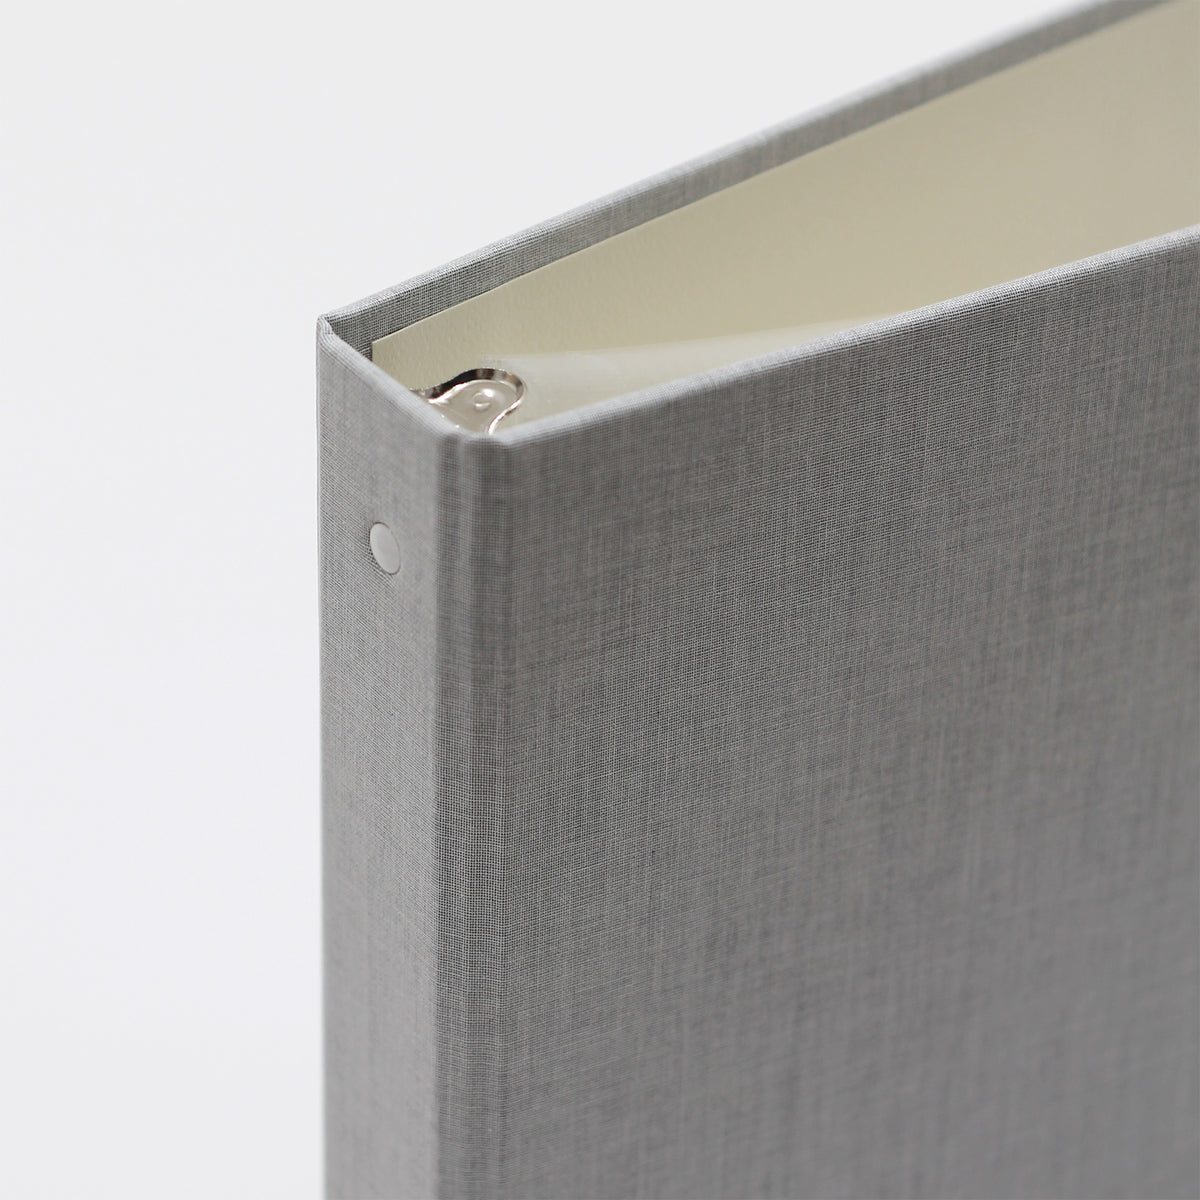 Storage Binder for Photos or Documents with Dove Gray Linen Cover